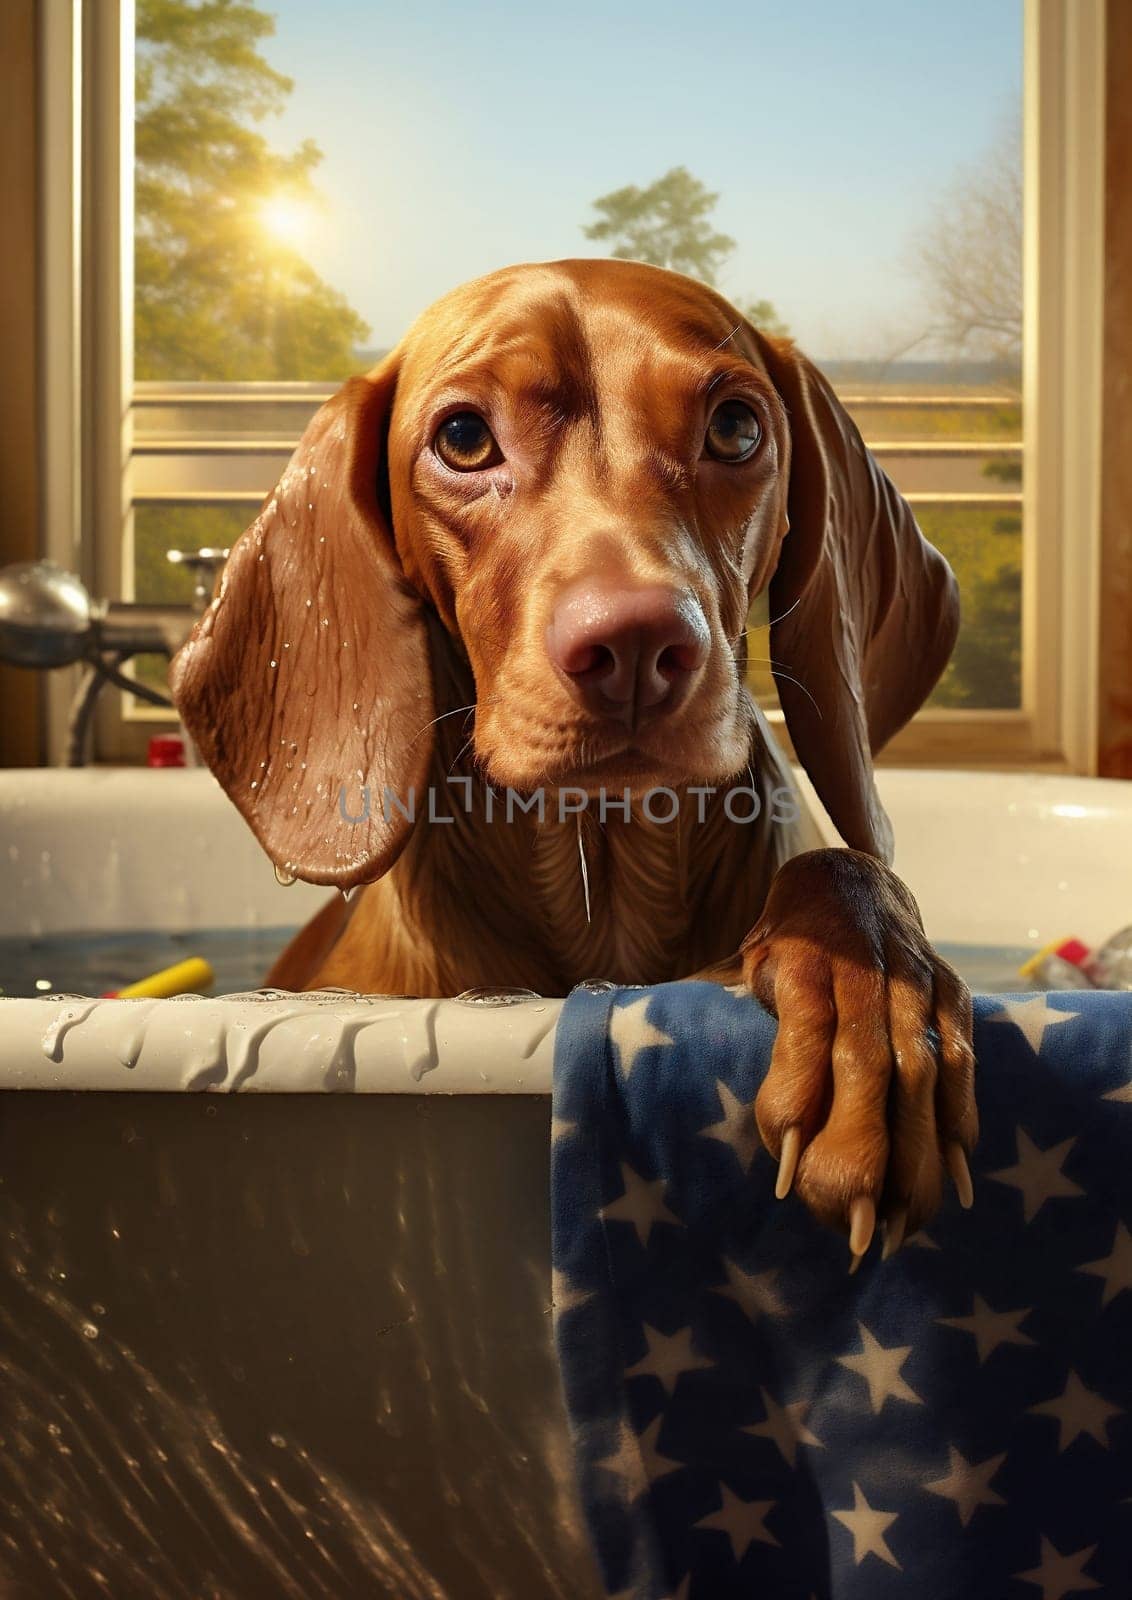 Clean dog looking sad cute beautiful domestic young portrait brown canine dachshund puppy white home grooming hound pets friend animal wet